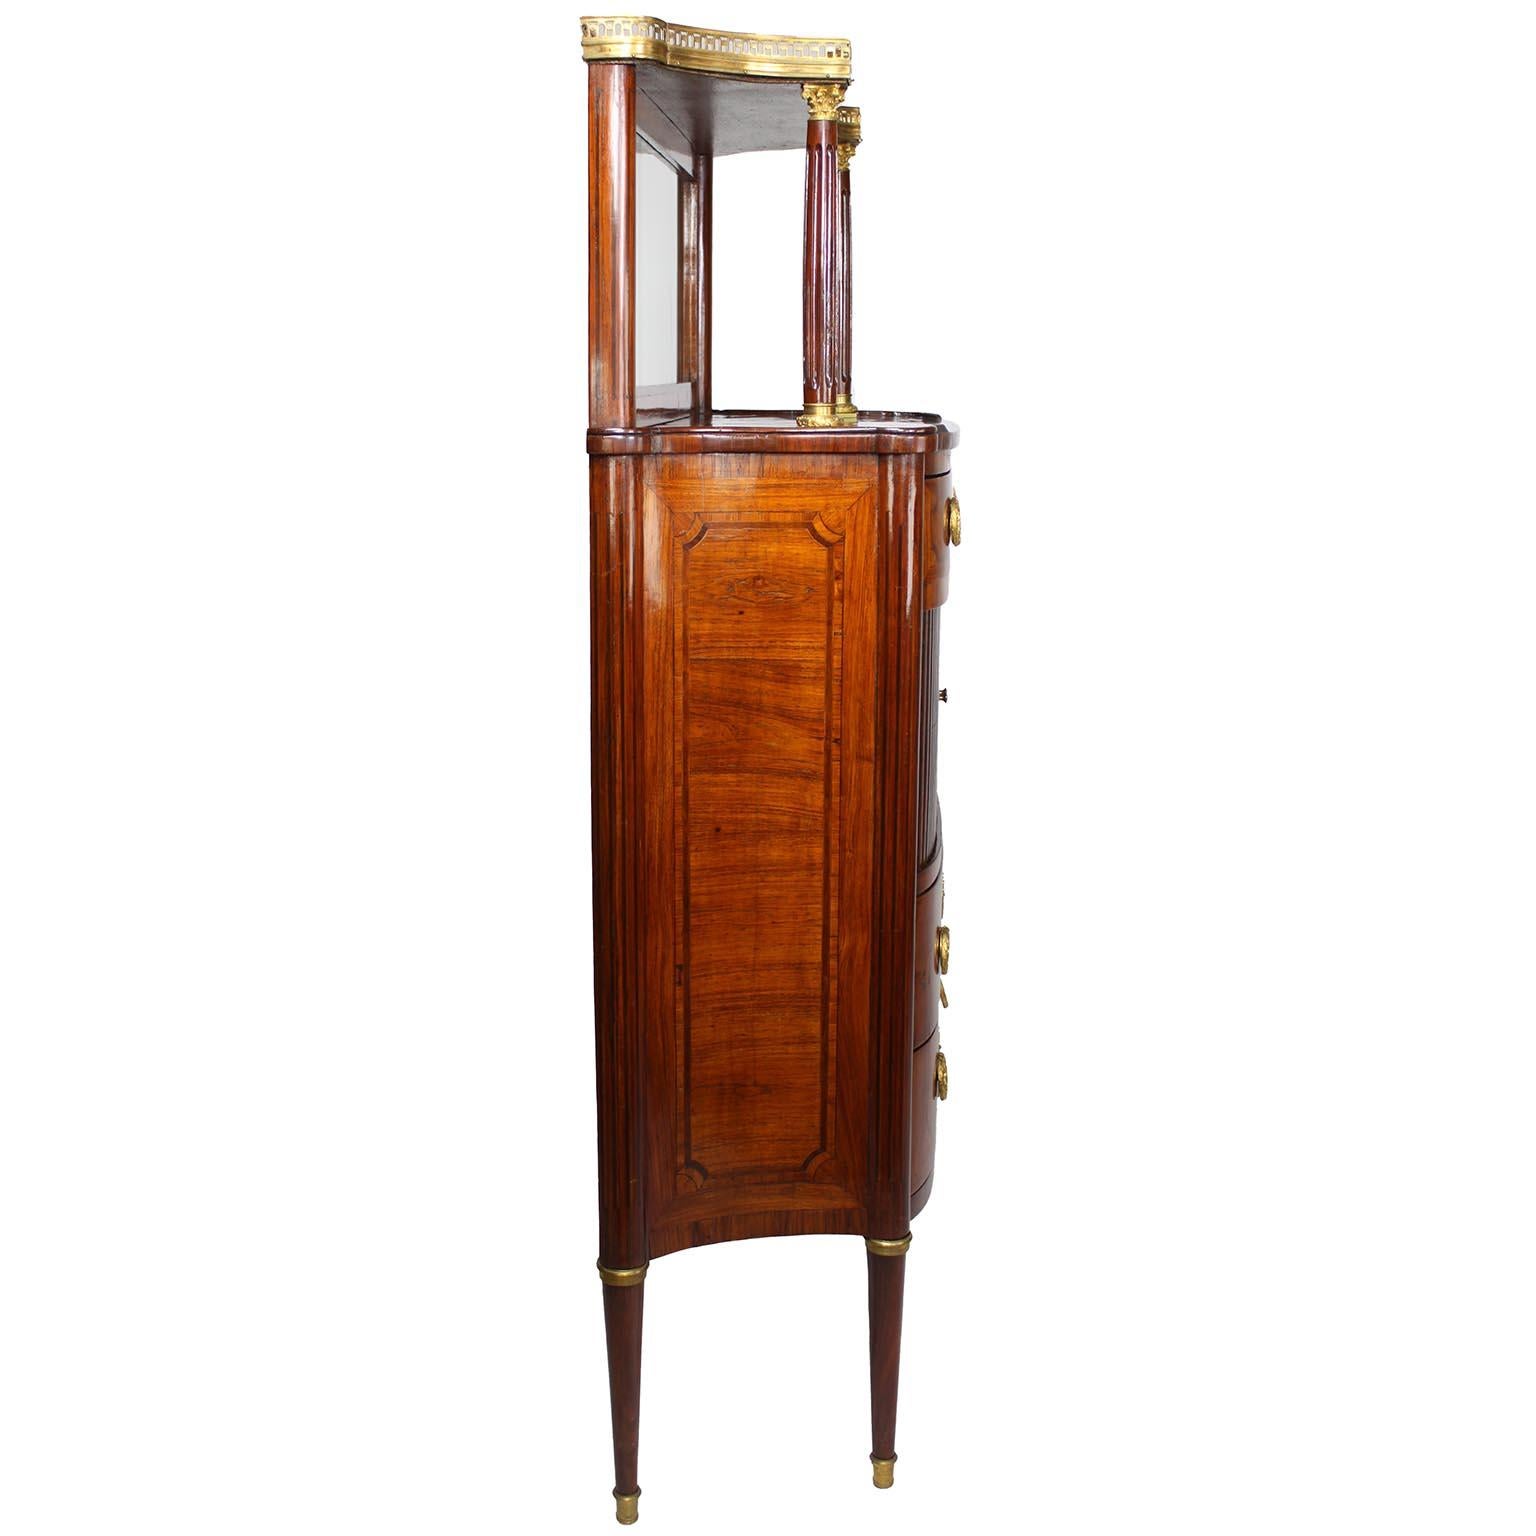 A French 19th Century Louis XVI Style Gilt-Bronze Mounted Meuble d'Appui Cabinet For Sale 9